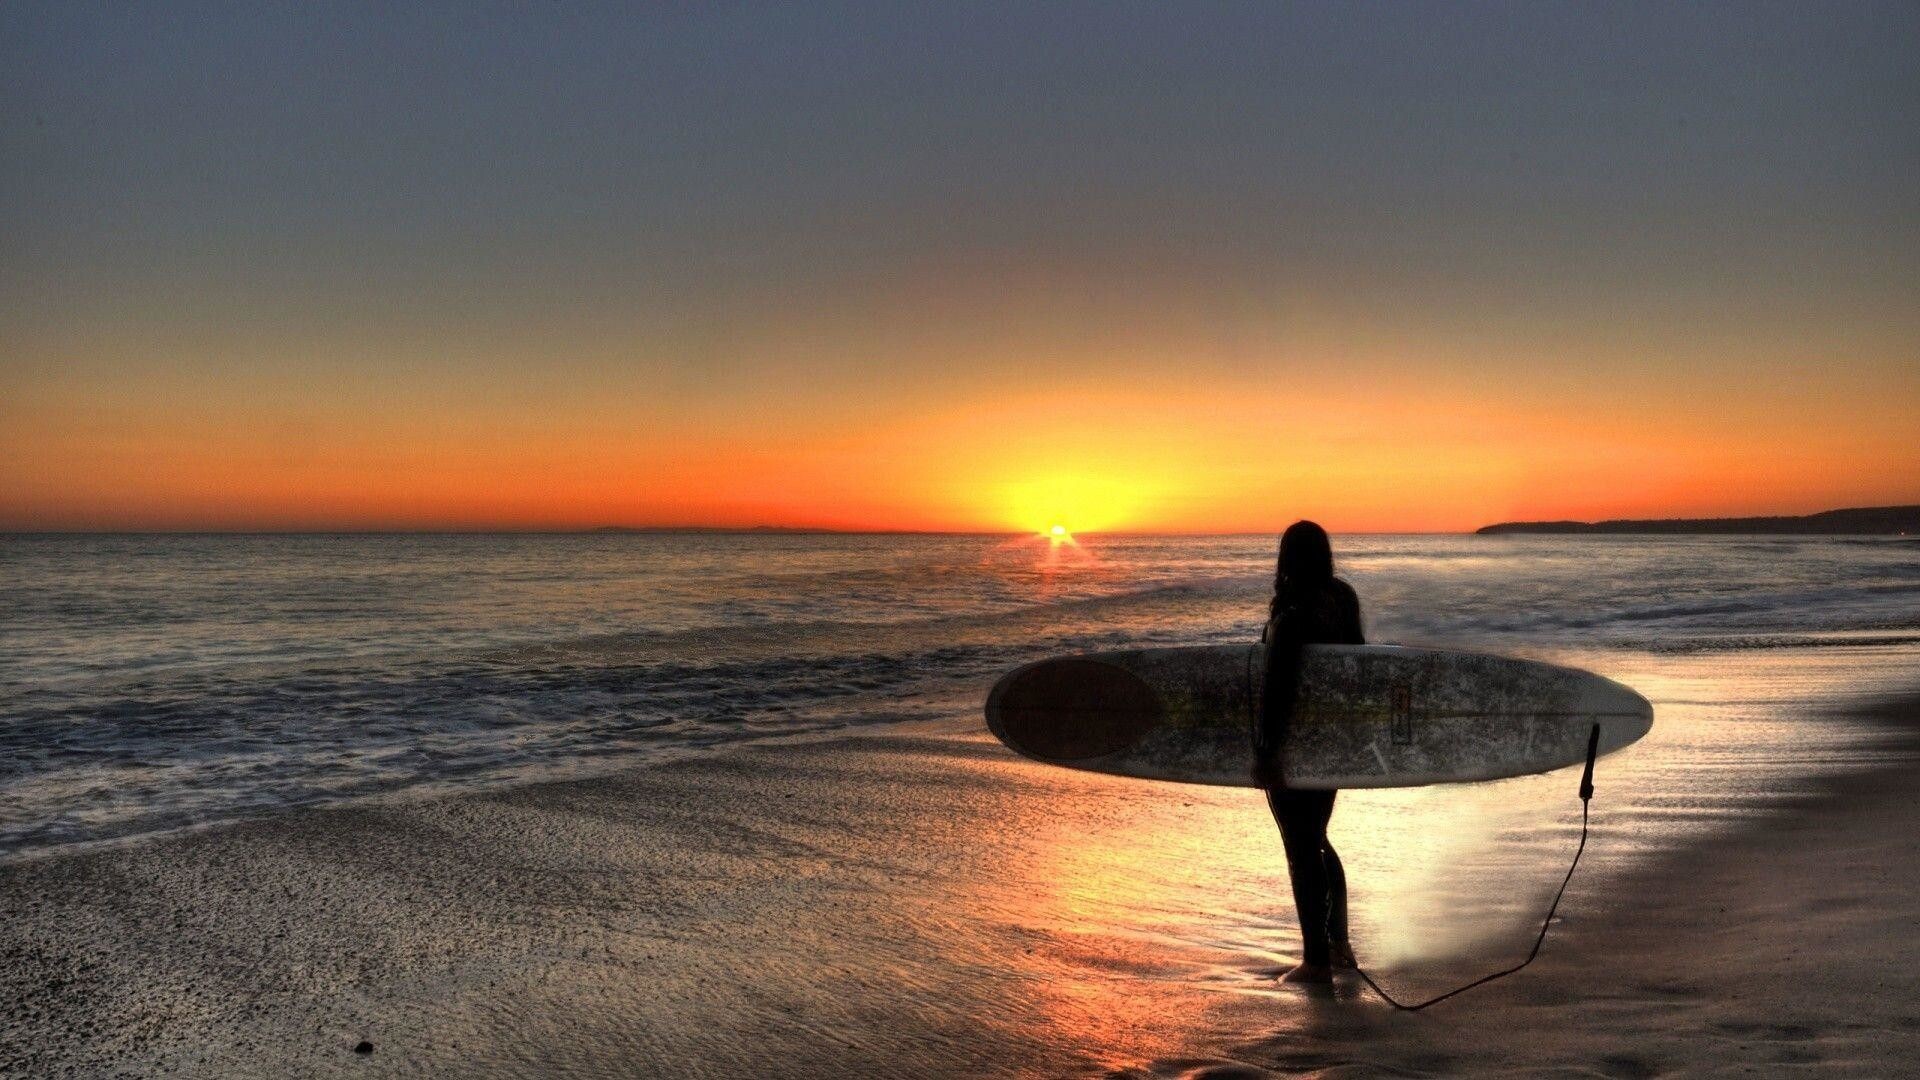 Girl Surfing: Sunset at the beach, Water sports, Costa Rica, Beaches on the Caribbean coast. 1920x1080 Full HD Background.